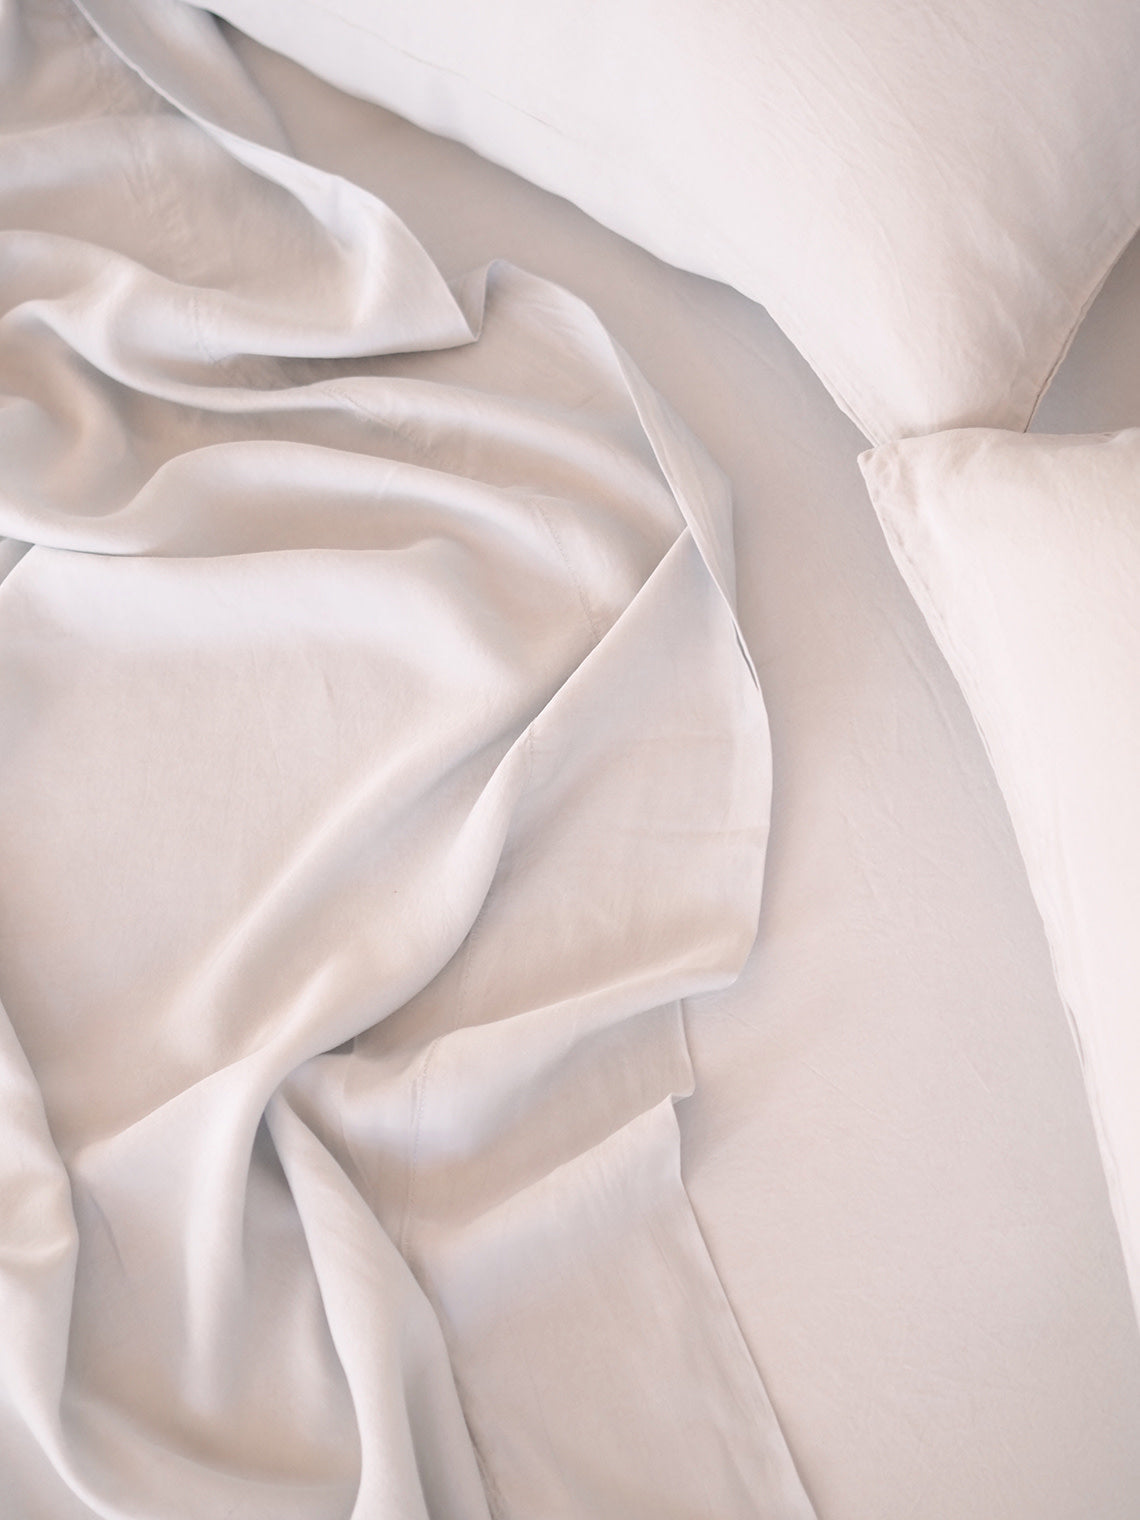 Madera Cloud Luxe Sheets